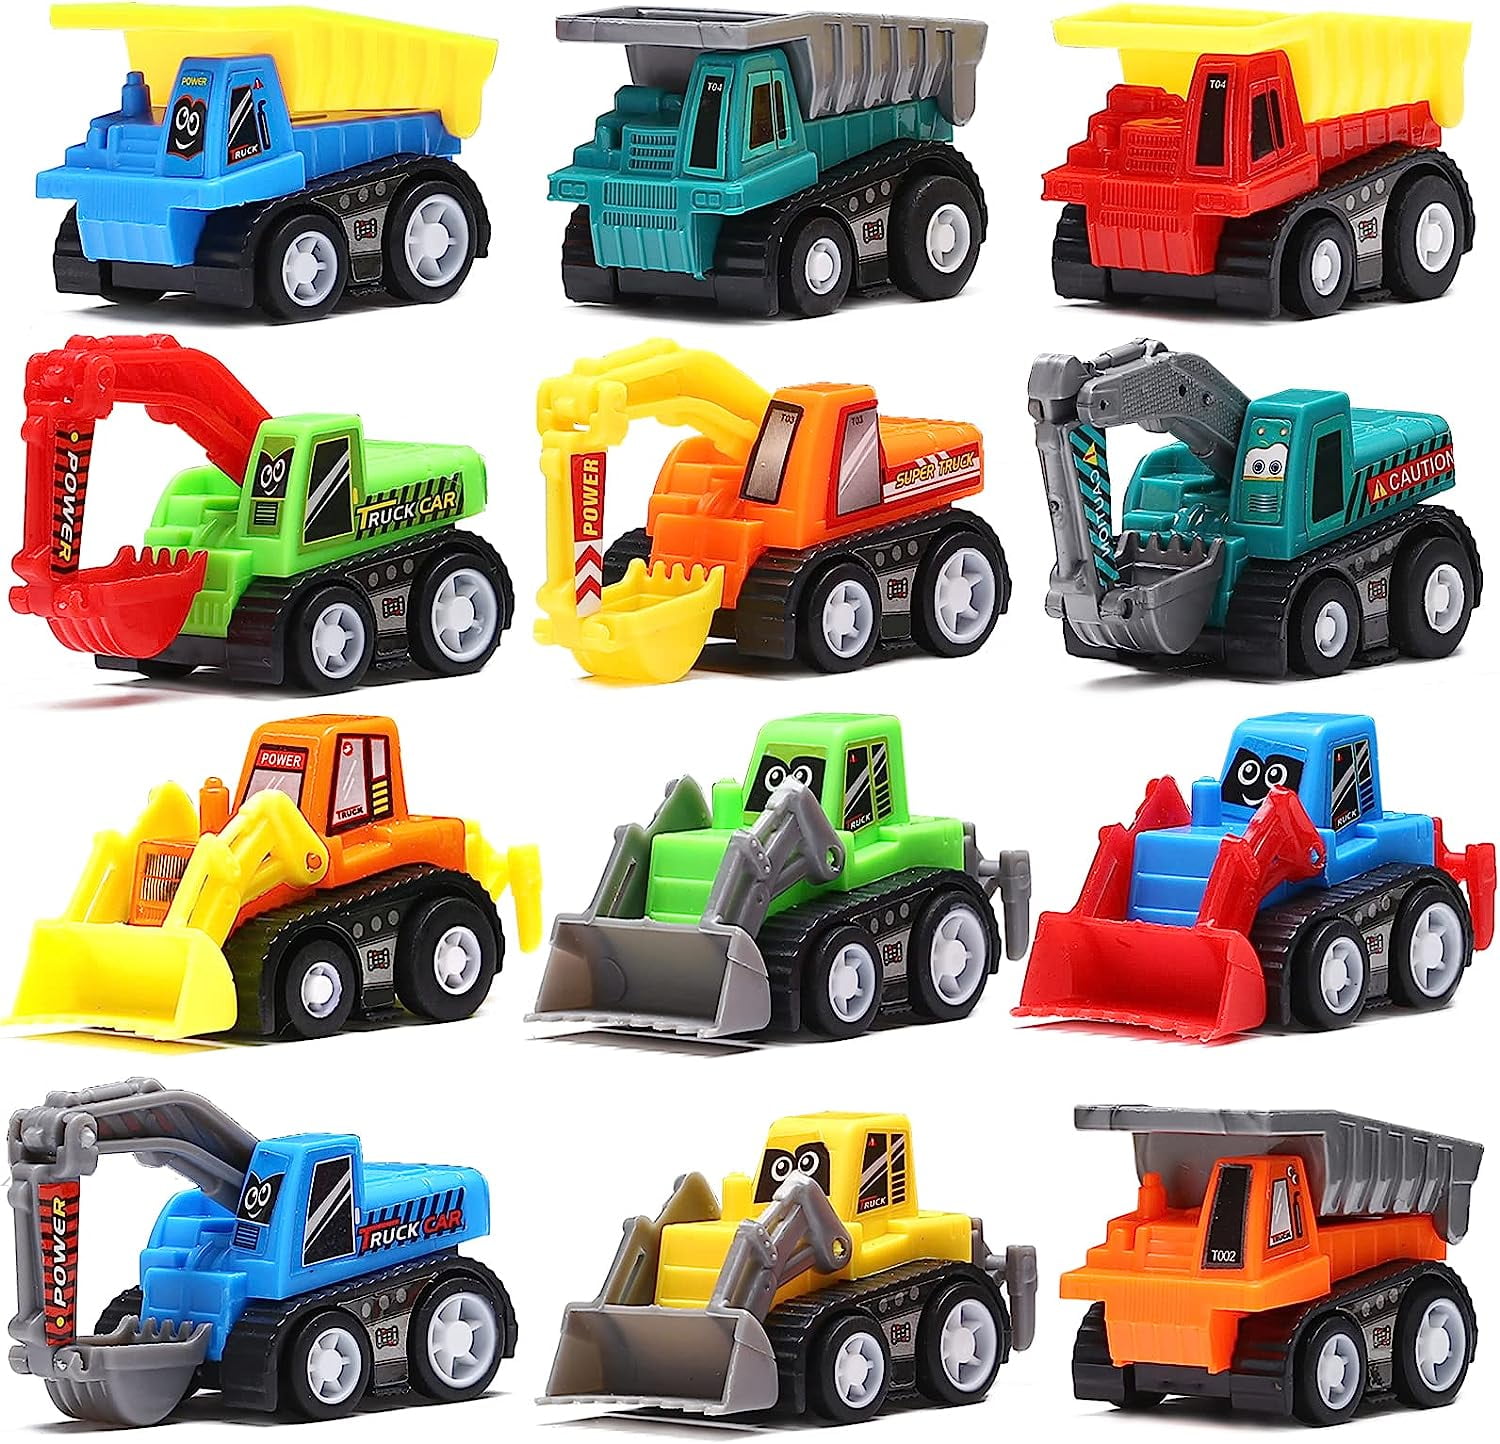 Pull Back Car 12 Pcs Mini Truck Toy Kit Set Funcorn Toys Play Construction Engineering Vehicle Educational Preschool for Children Boys Party Favors